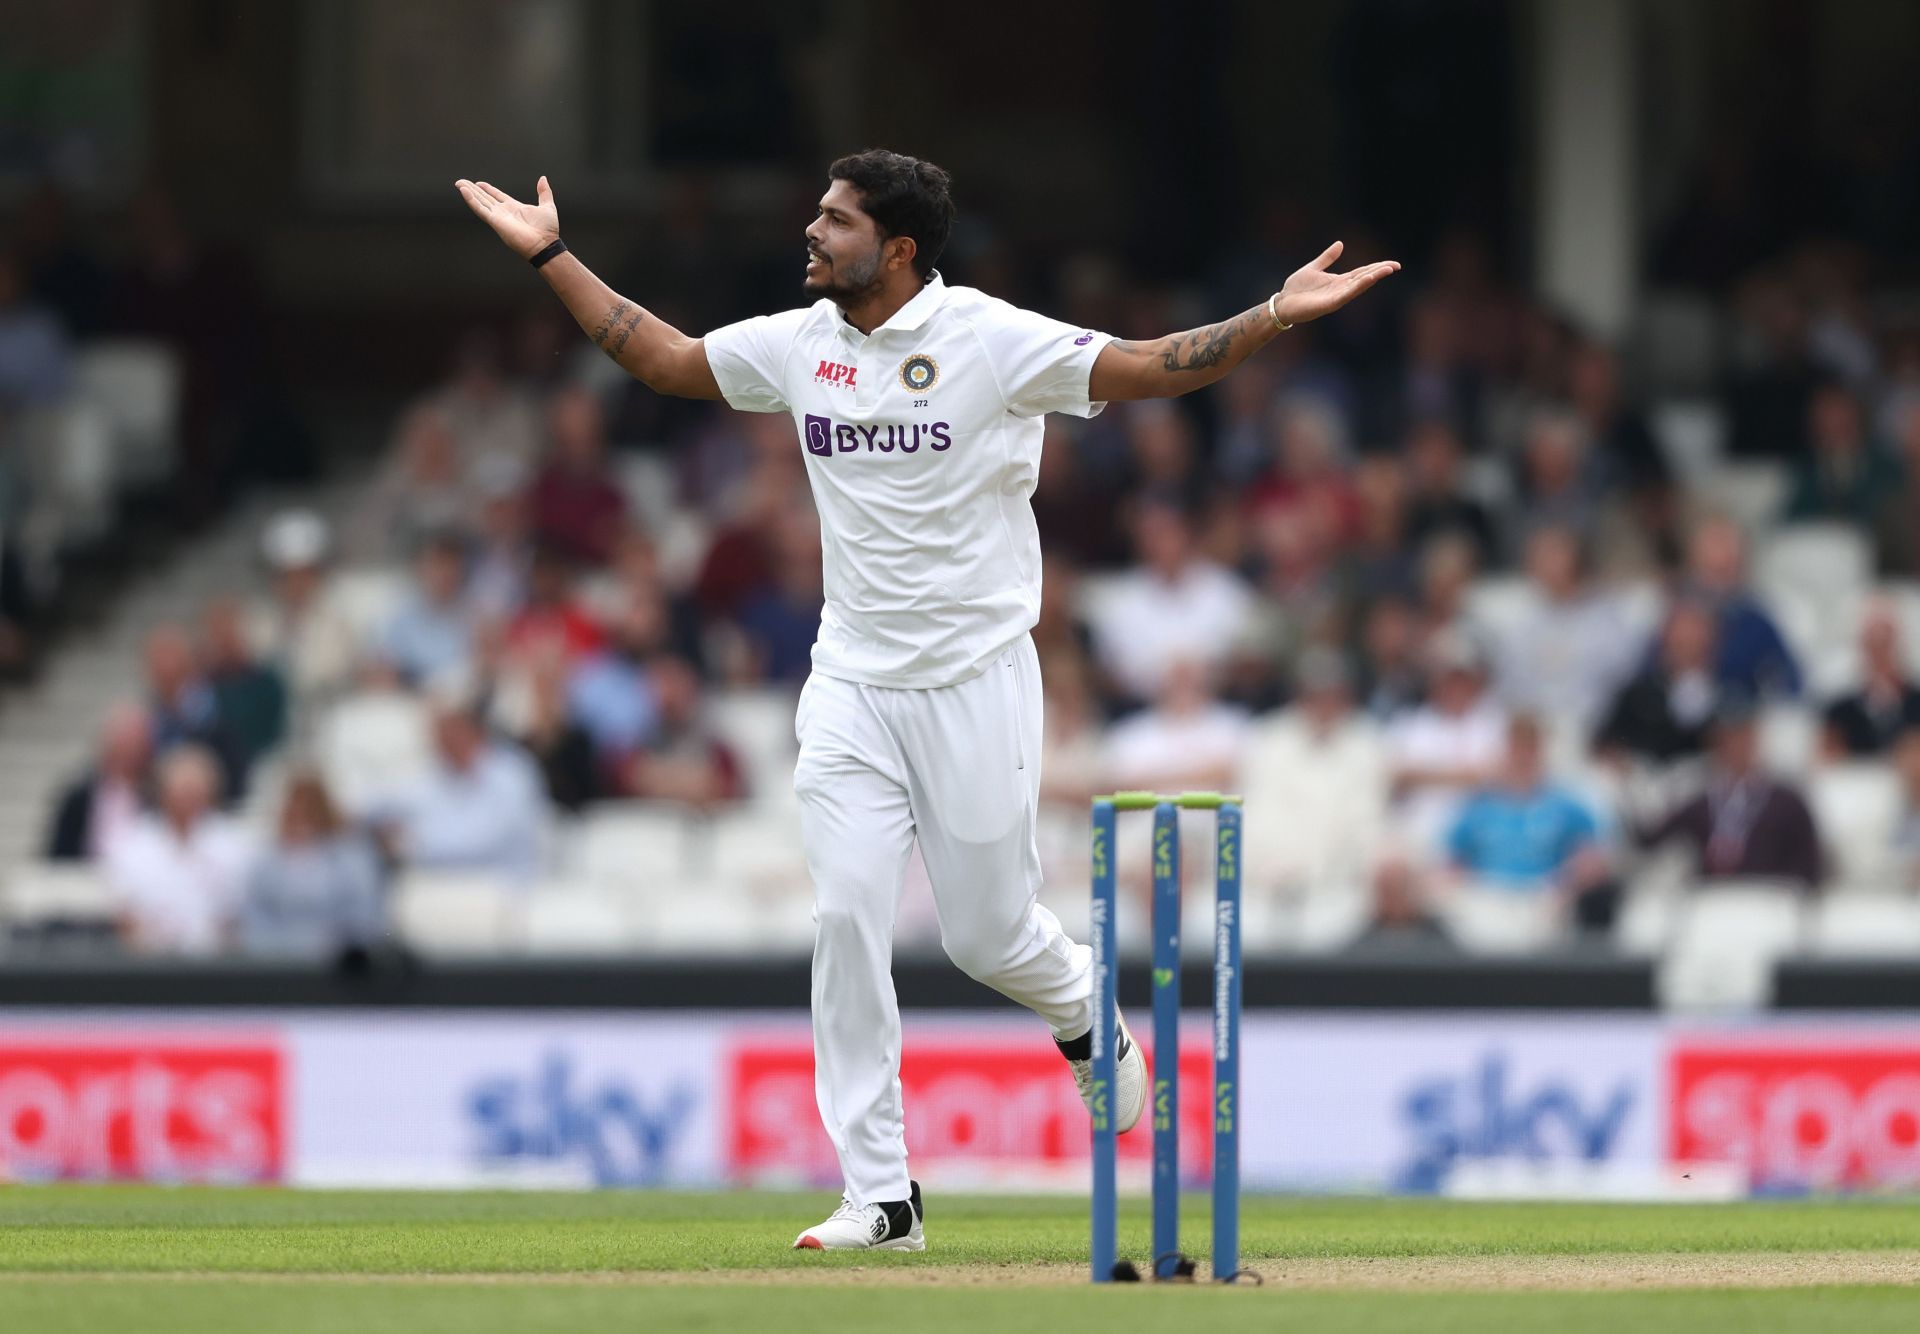 According to Jaffer, Umesh Yadav has done remarkably well at home